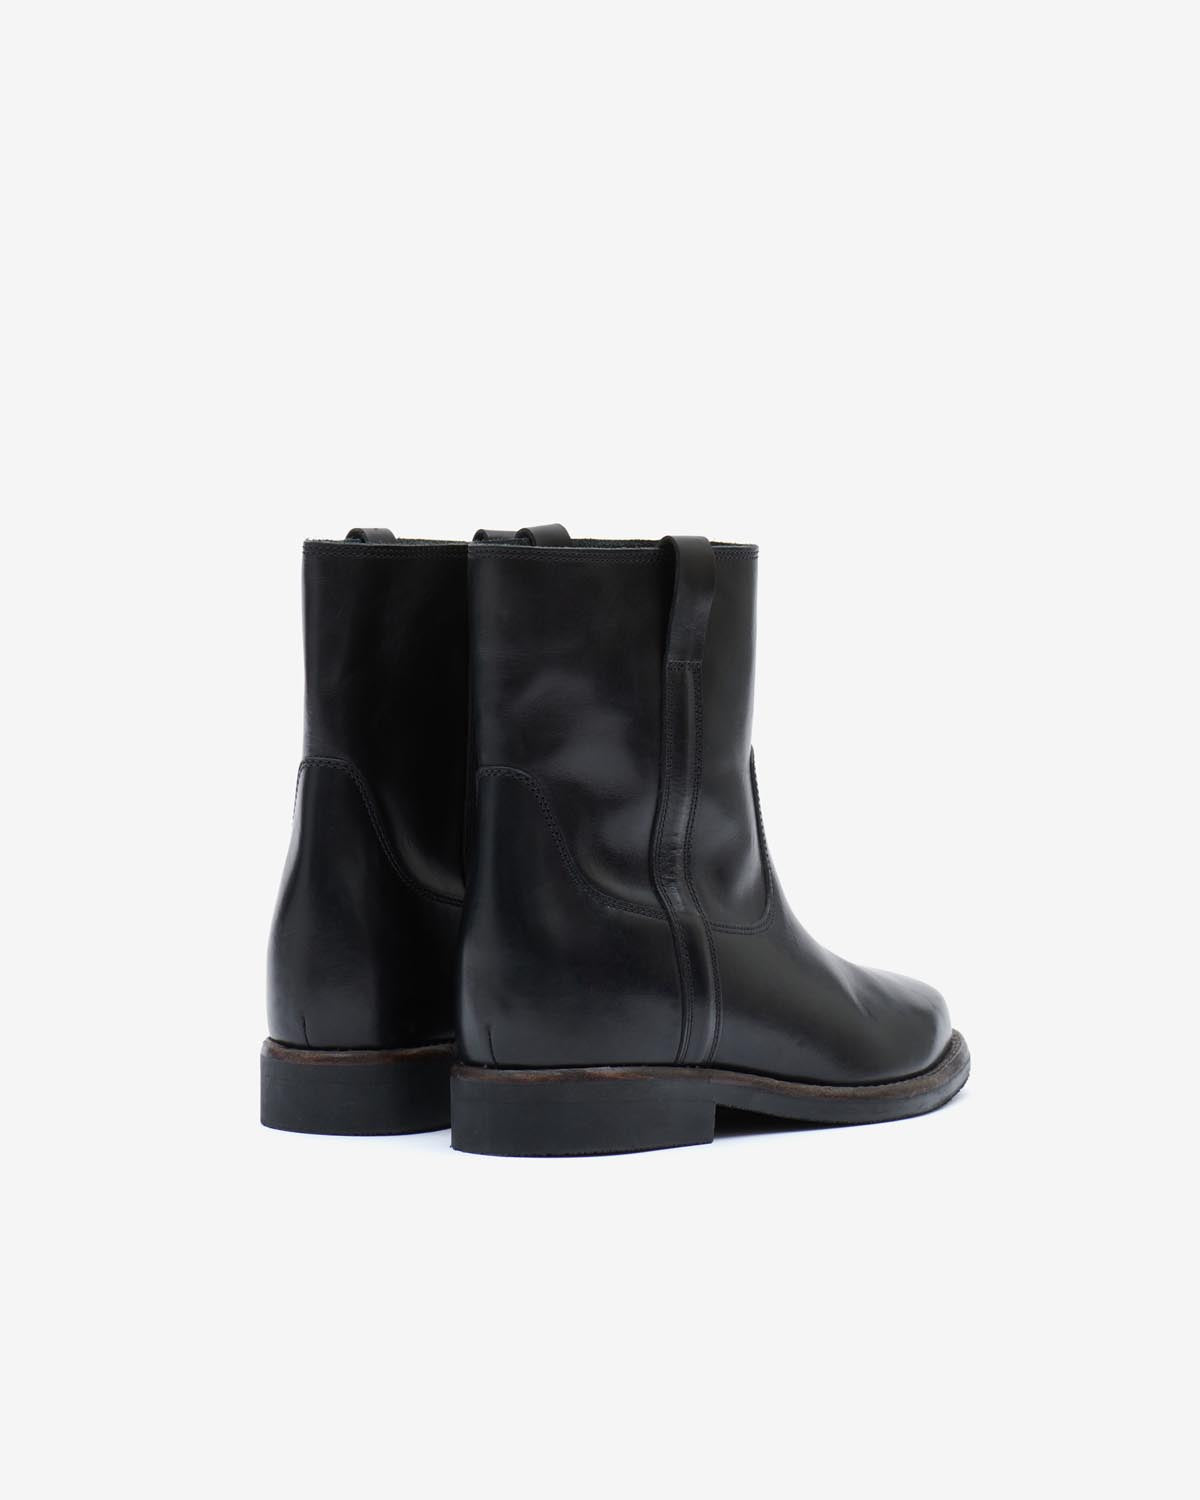 Susee low boots Woman Black 2